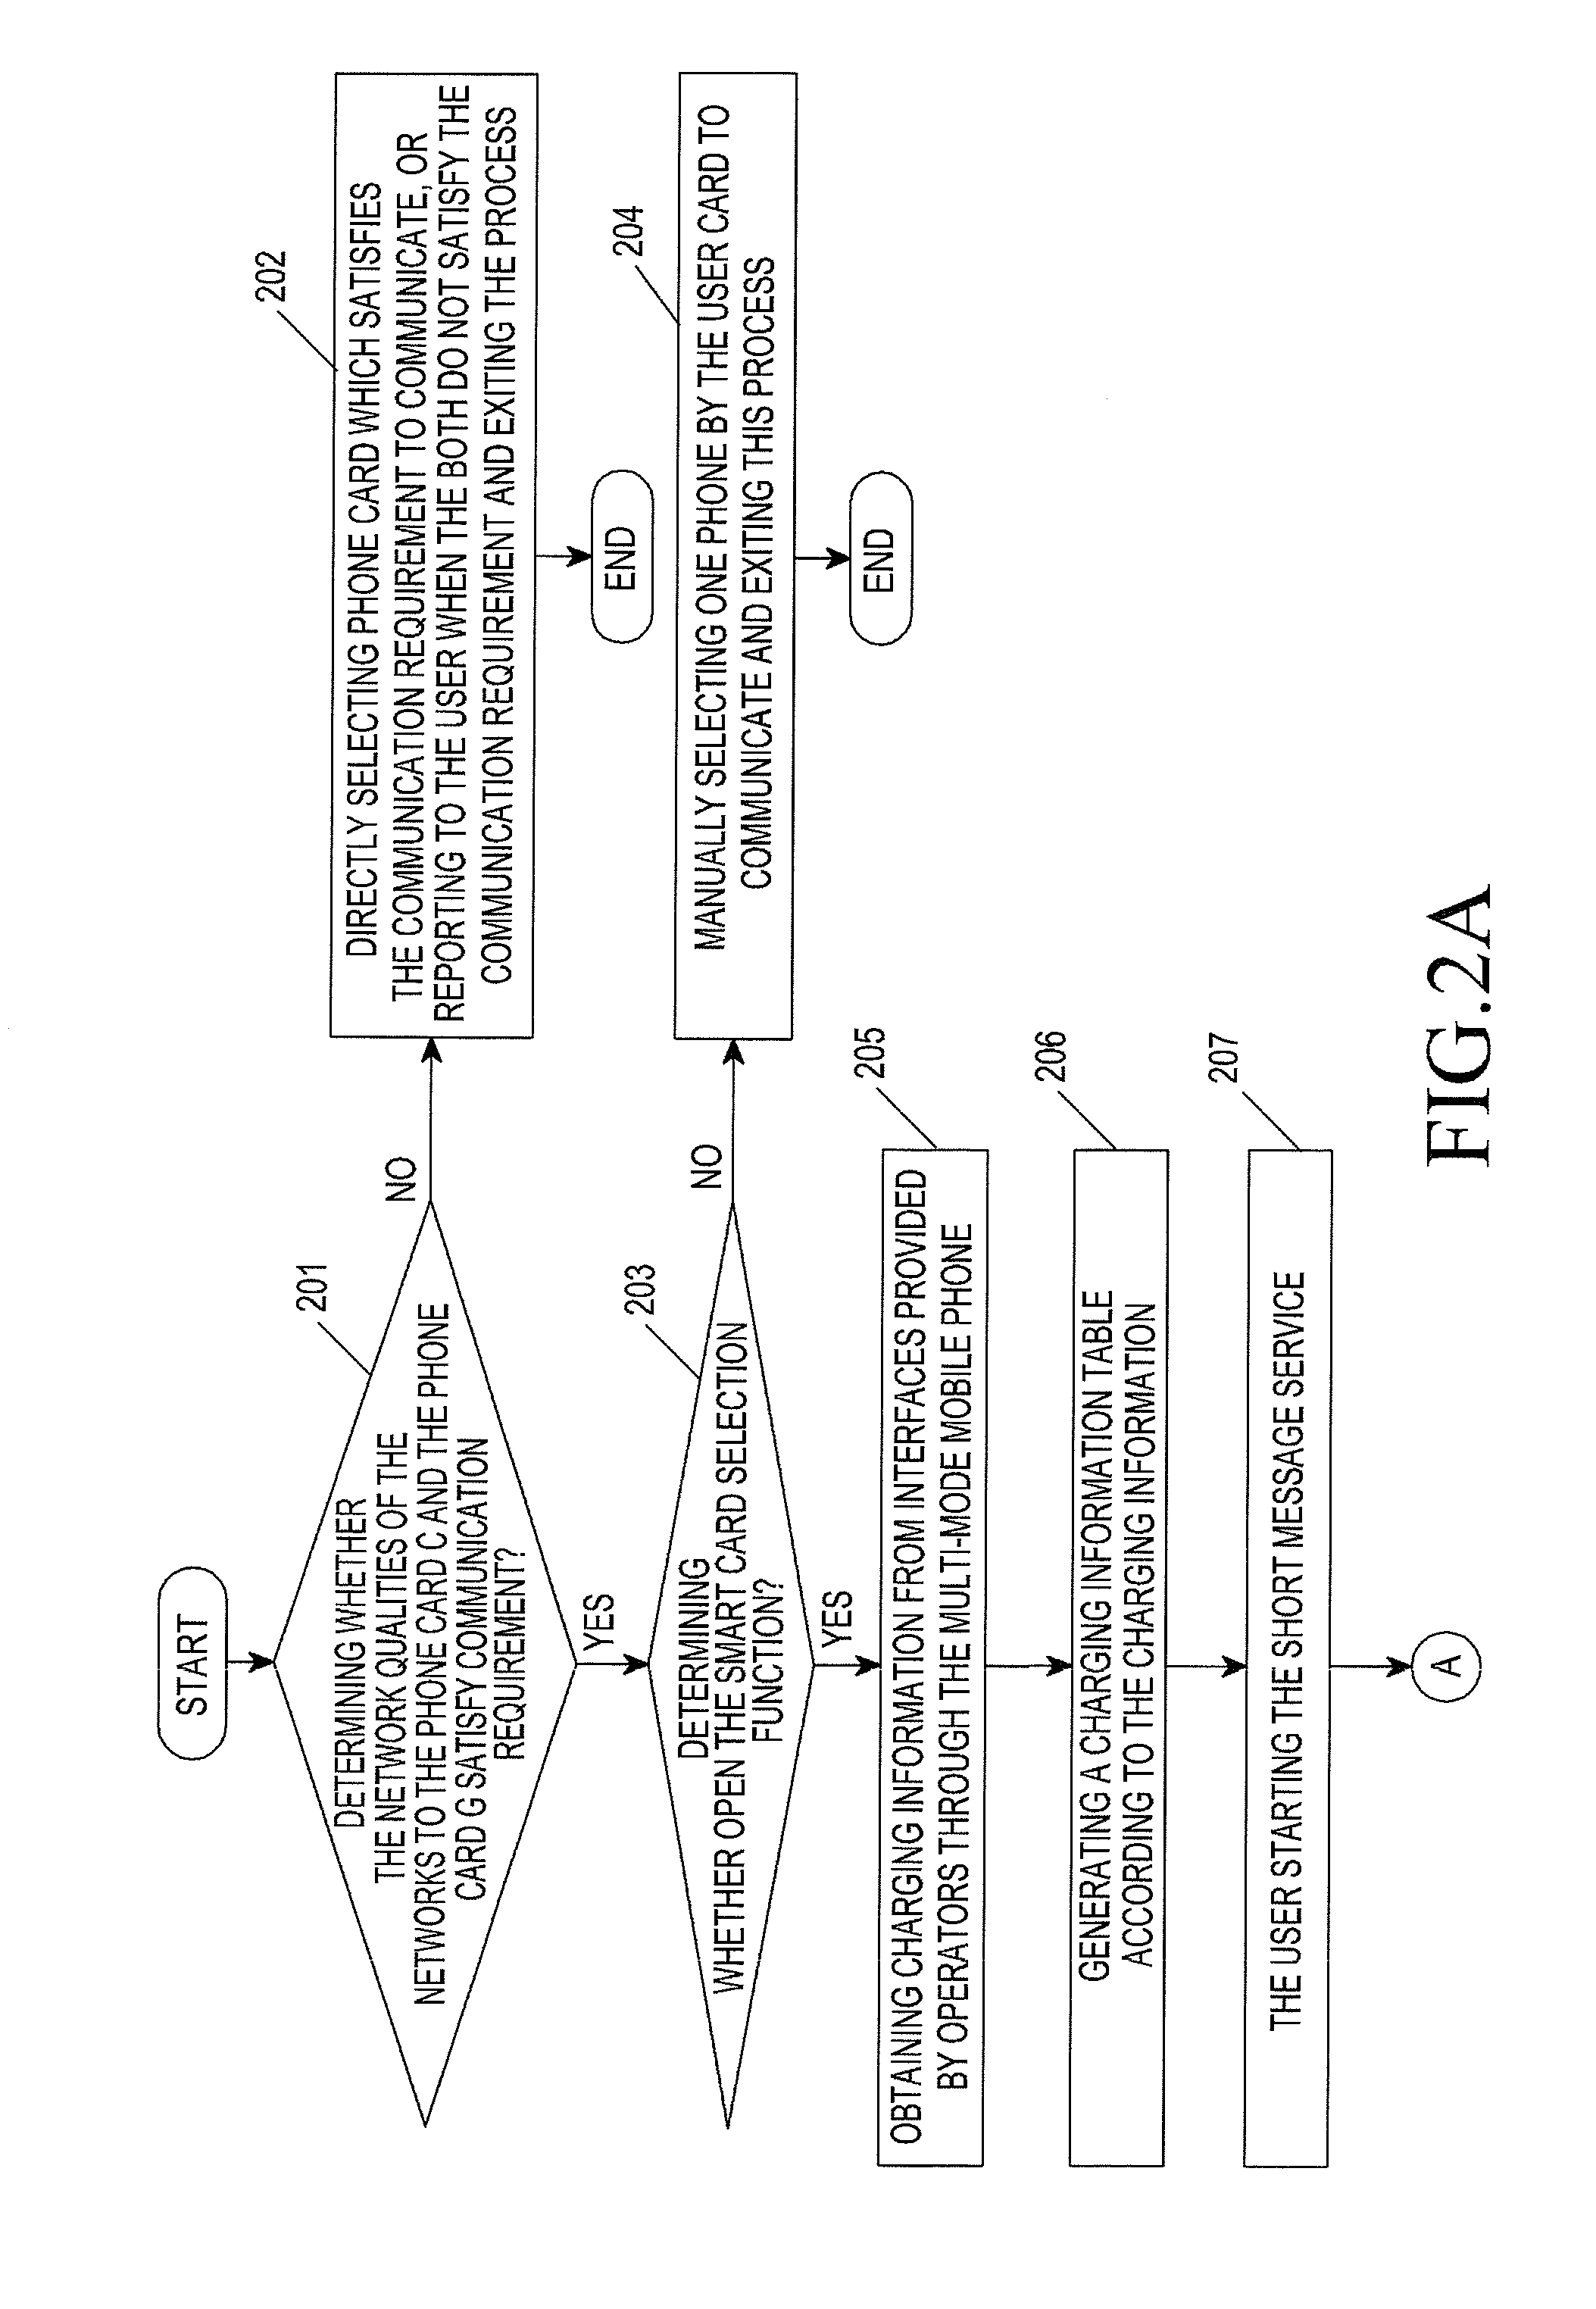 Method of selecting cards for multi-mode mobile phone